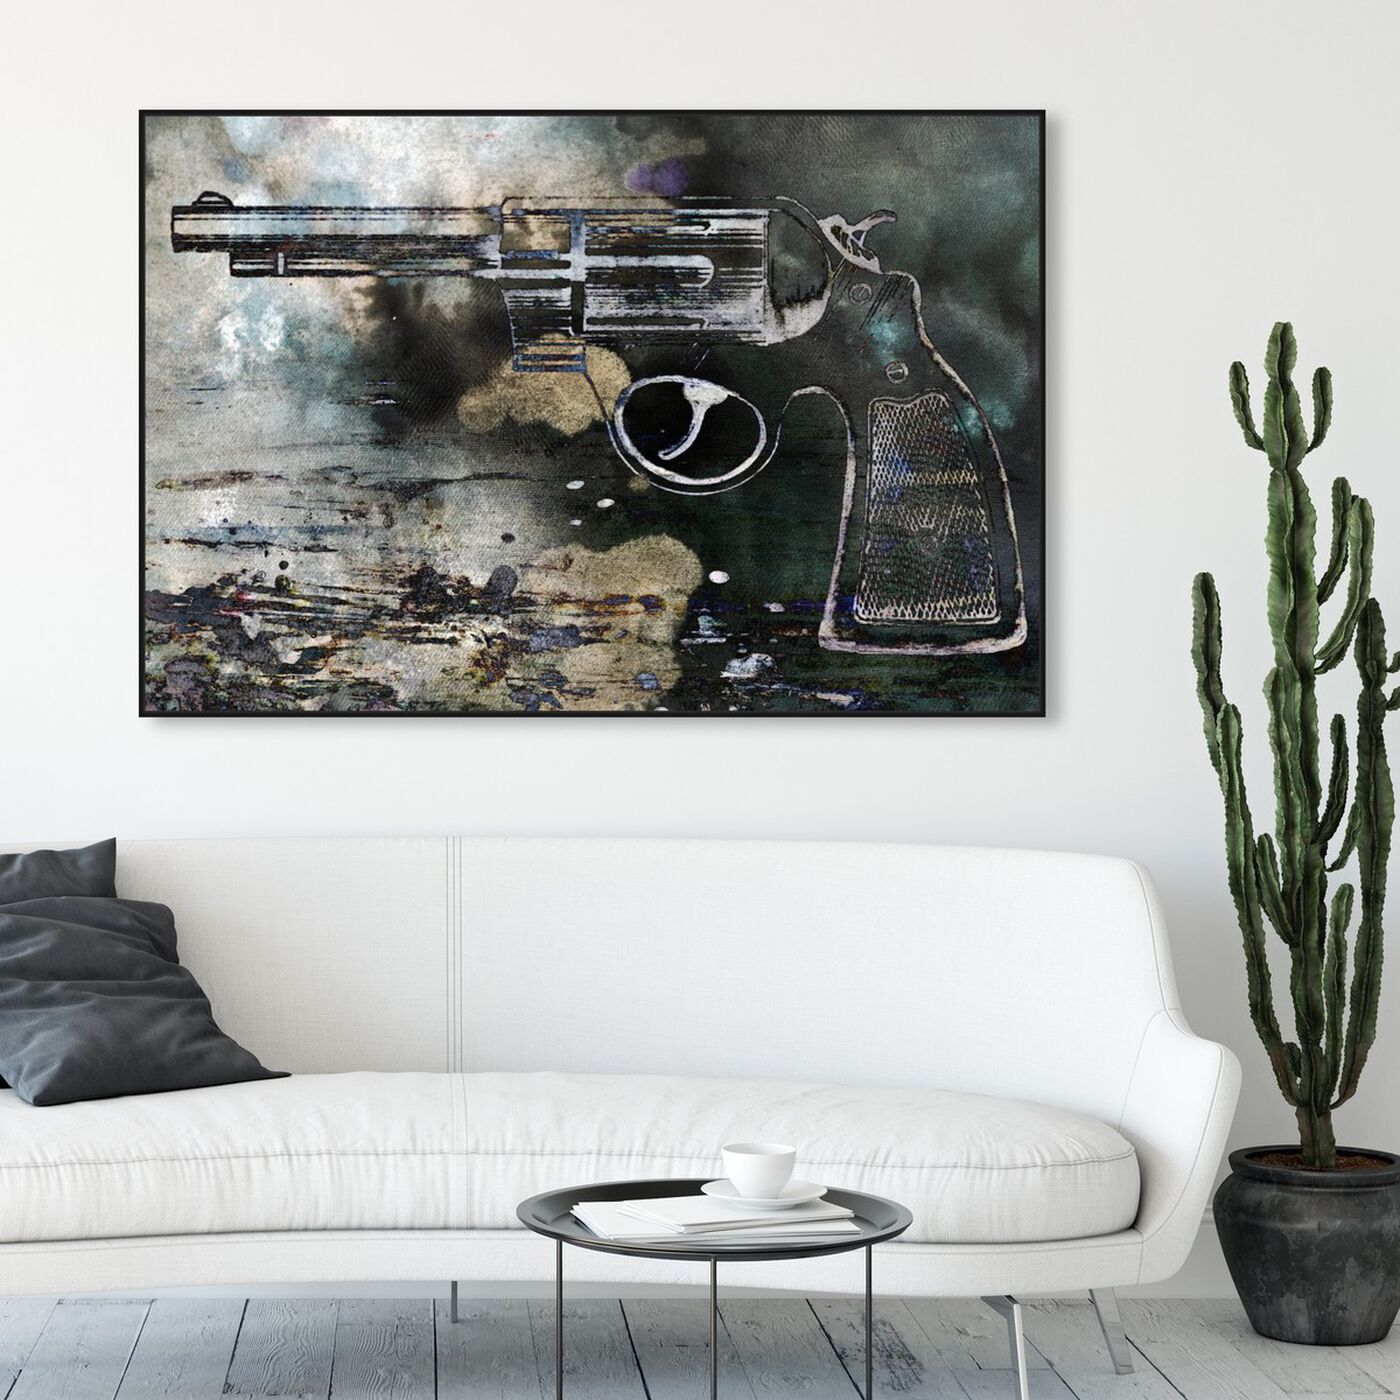 Hanging view of Magnum featuring entertainment and hobbies and machine guns art.